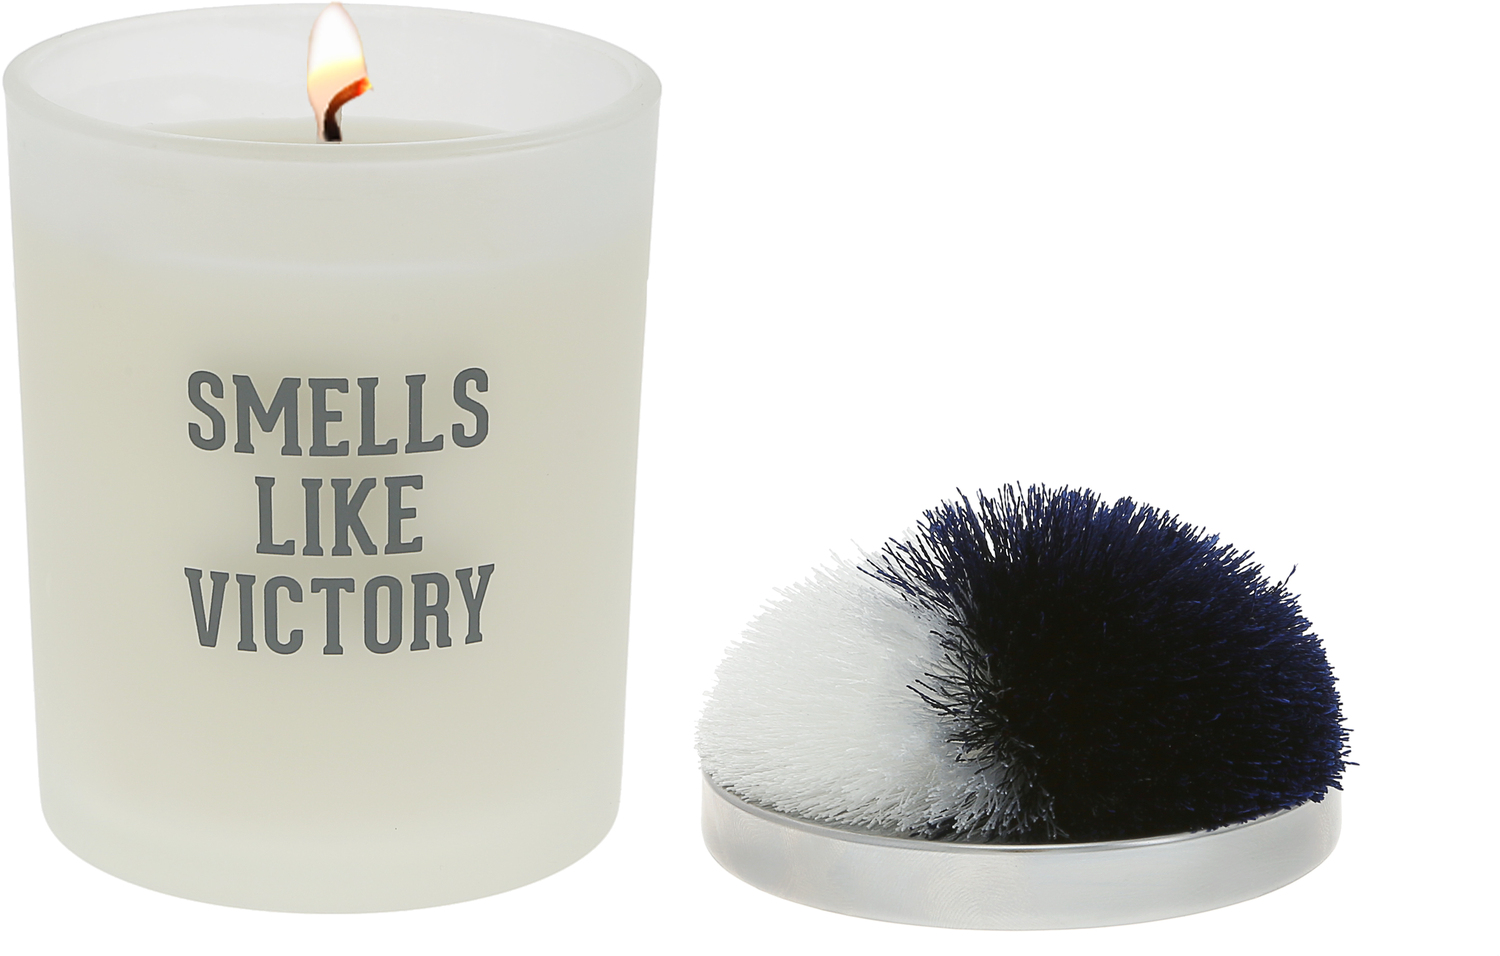 Victory - Navy & White by Repre-Scent - Victory - Navy & White - 5.5 oz - 100% Soy Wax Candle with Pom Pom Lid
Scent: Tranquility